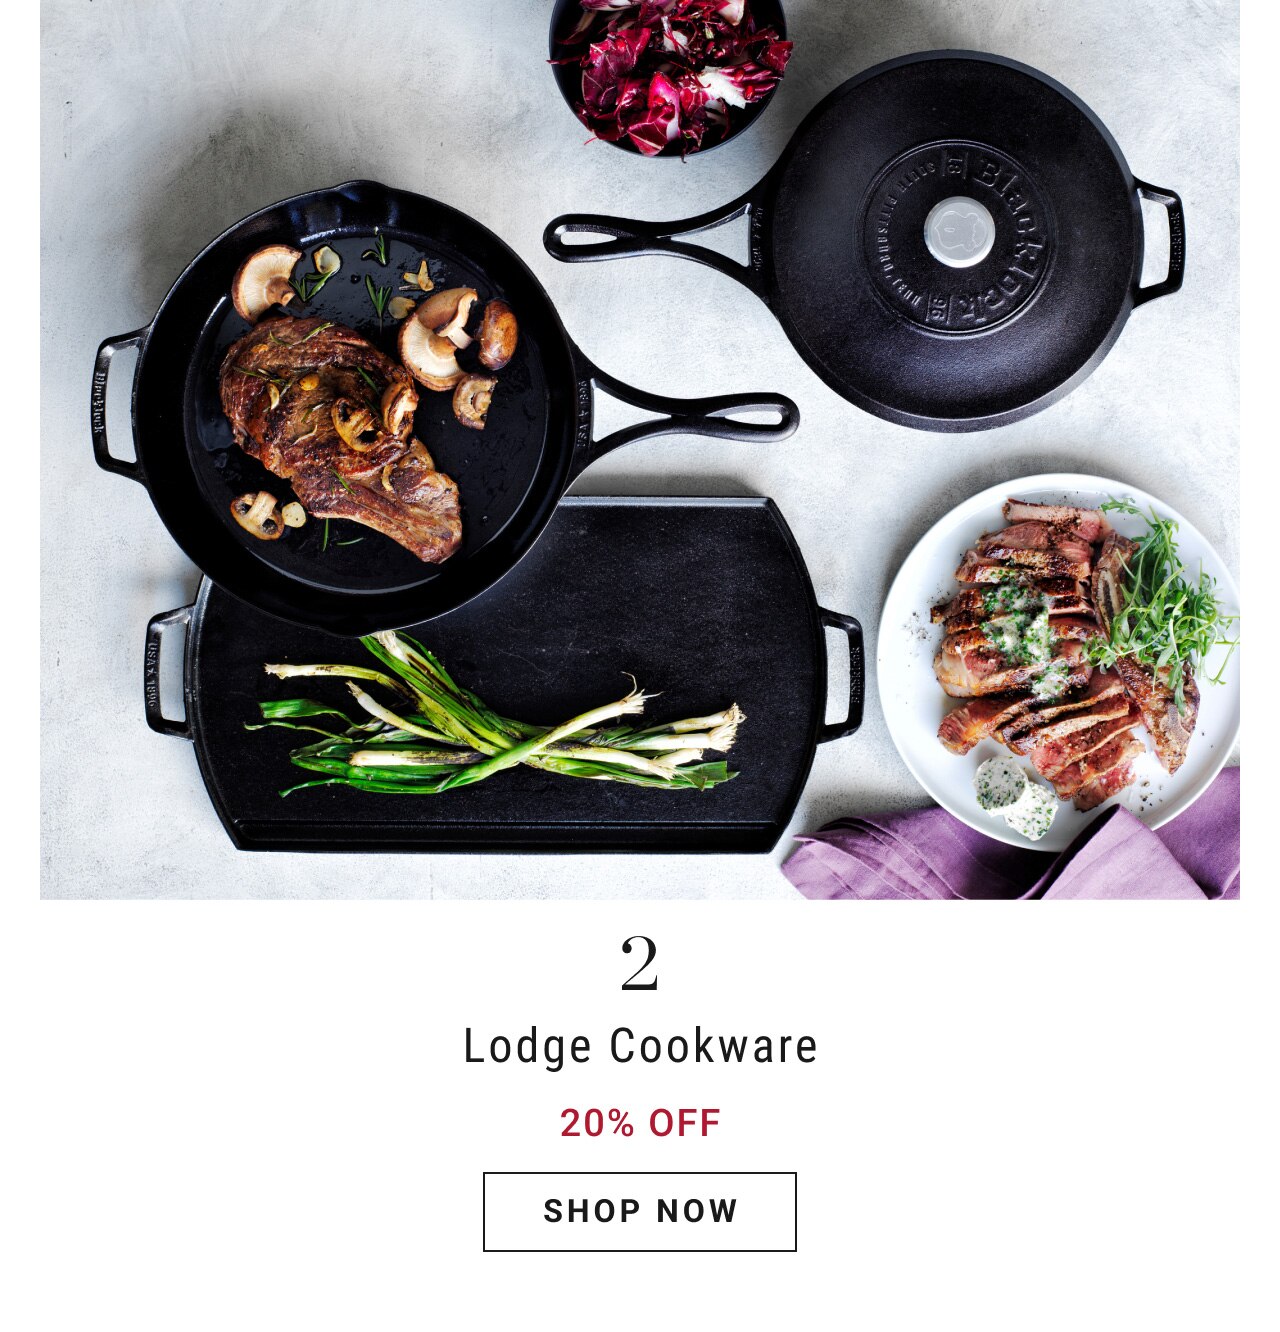  Lodge Cookware SHOP NOW 